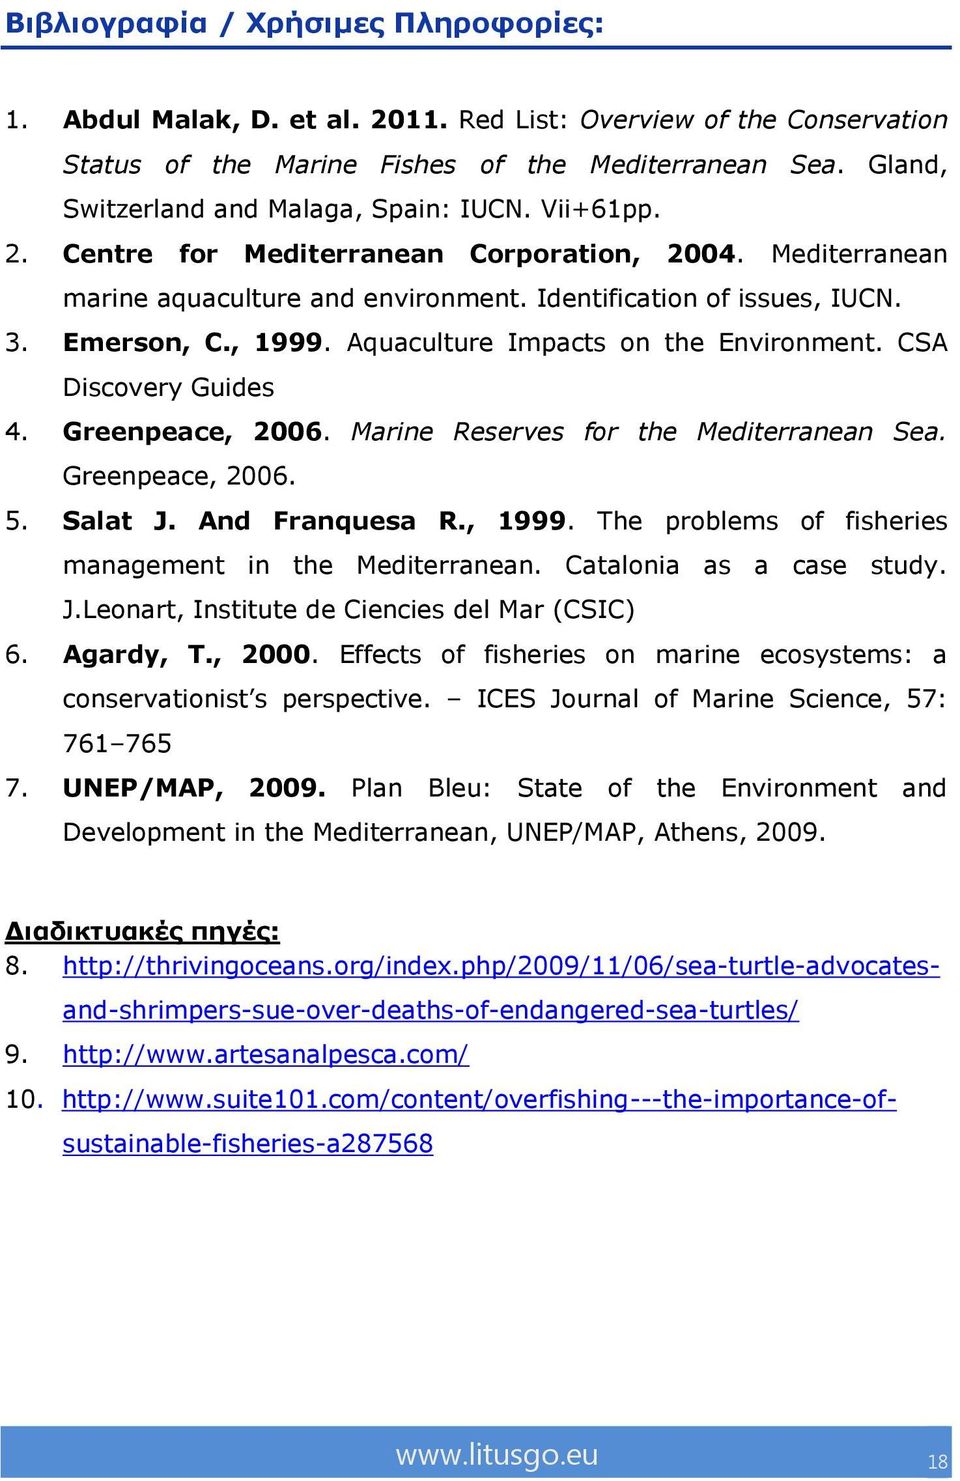 , 1999. Aquaculture Impacts on the Environment. CSA Discovery Guides 4. Greenpeace, 2006. Marine Reserves for the Mediterranean Sea. Greenpeace, 2006. 5. Salat J. And Franquesa R., 1999. The problems of fisheries management in the Mediterranean.